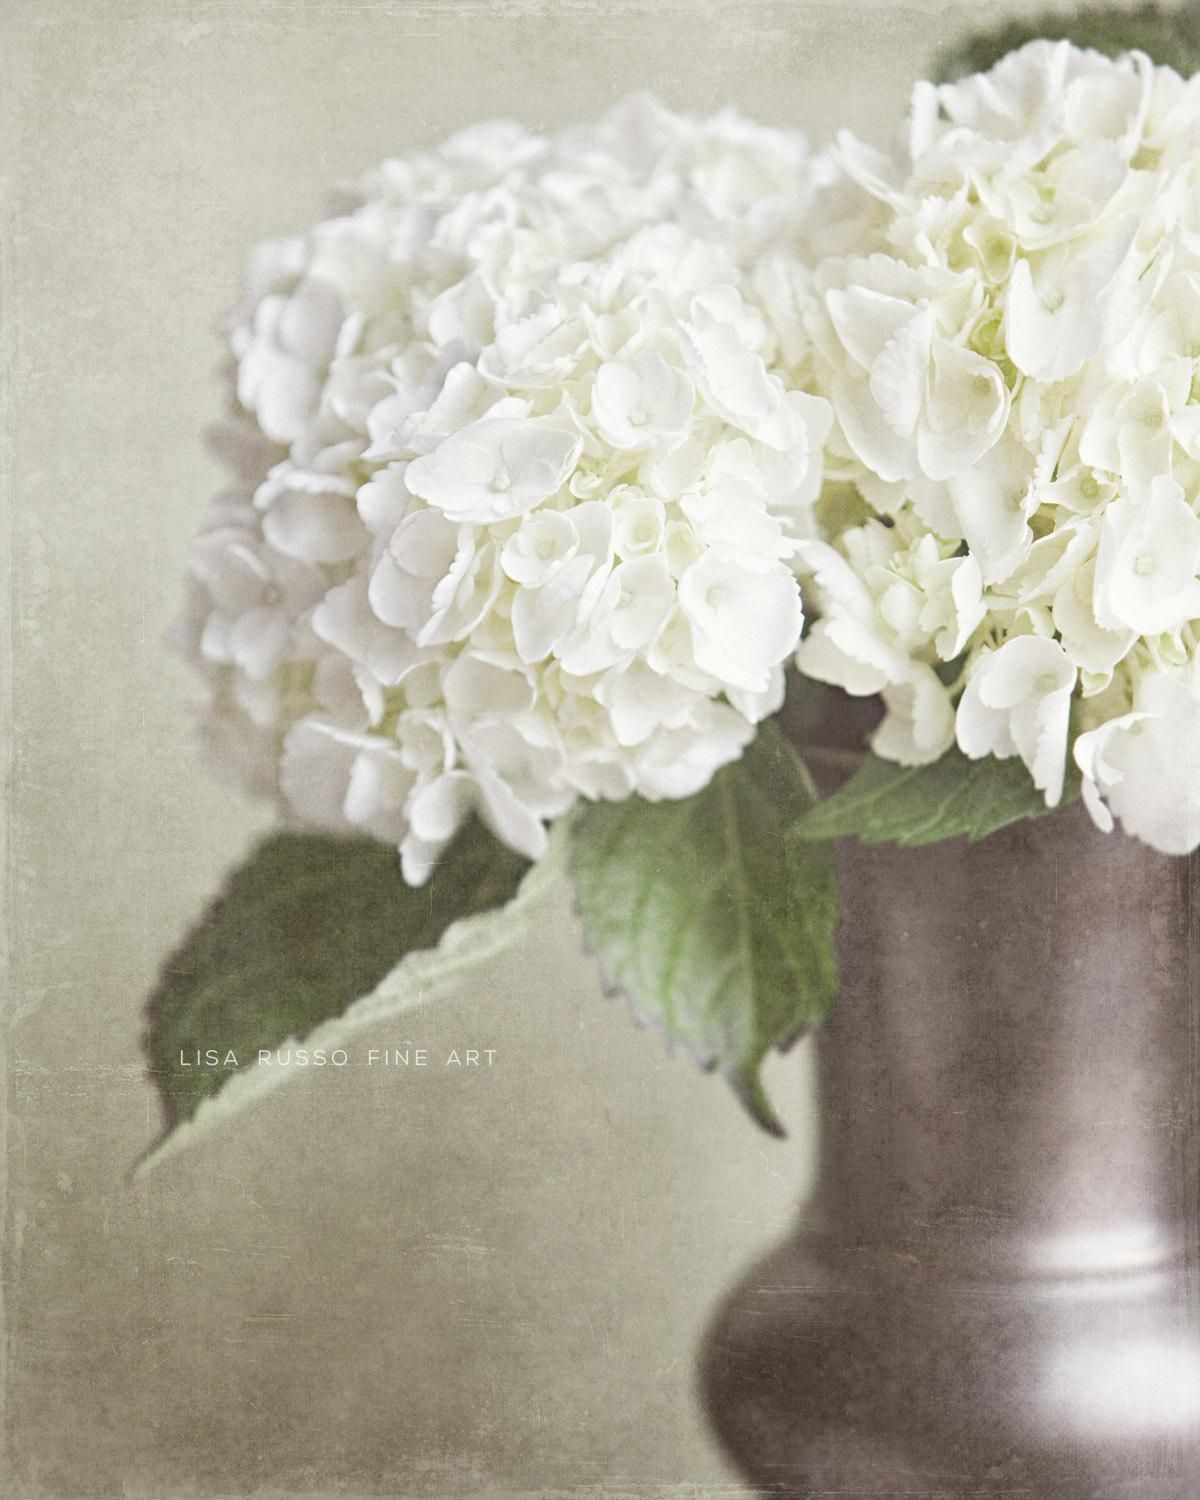 Shabby Chic Wall Decor Rustic Home Print Or Canvas Art Intended For Shabby Chic Wall Art (View 13 of 20)